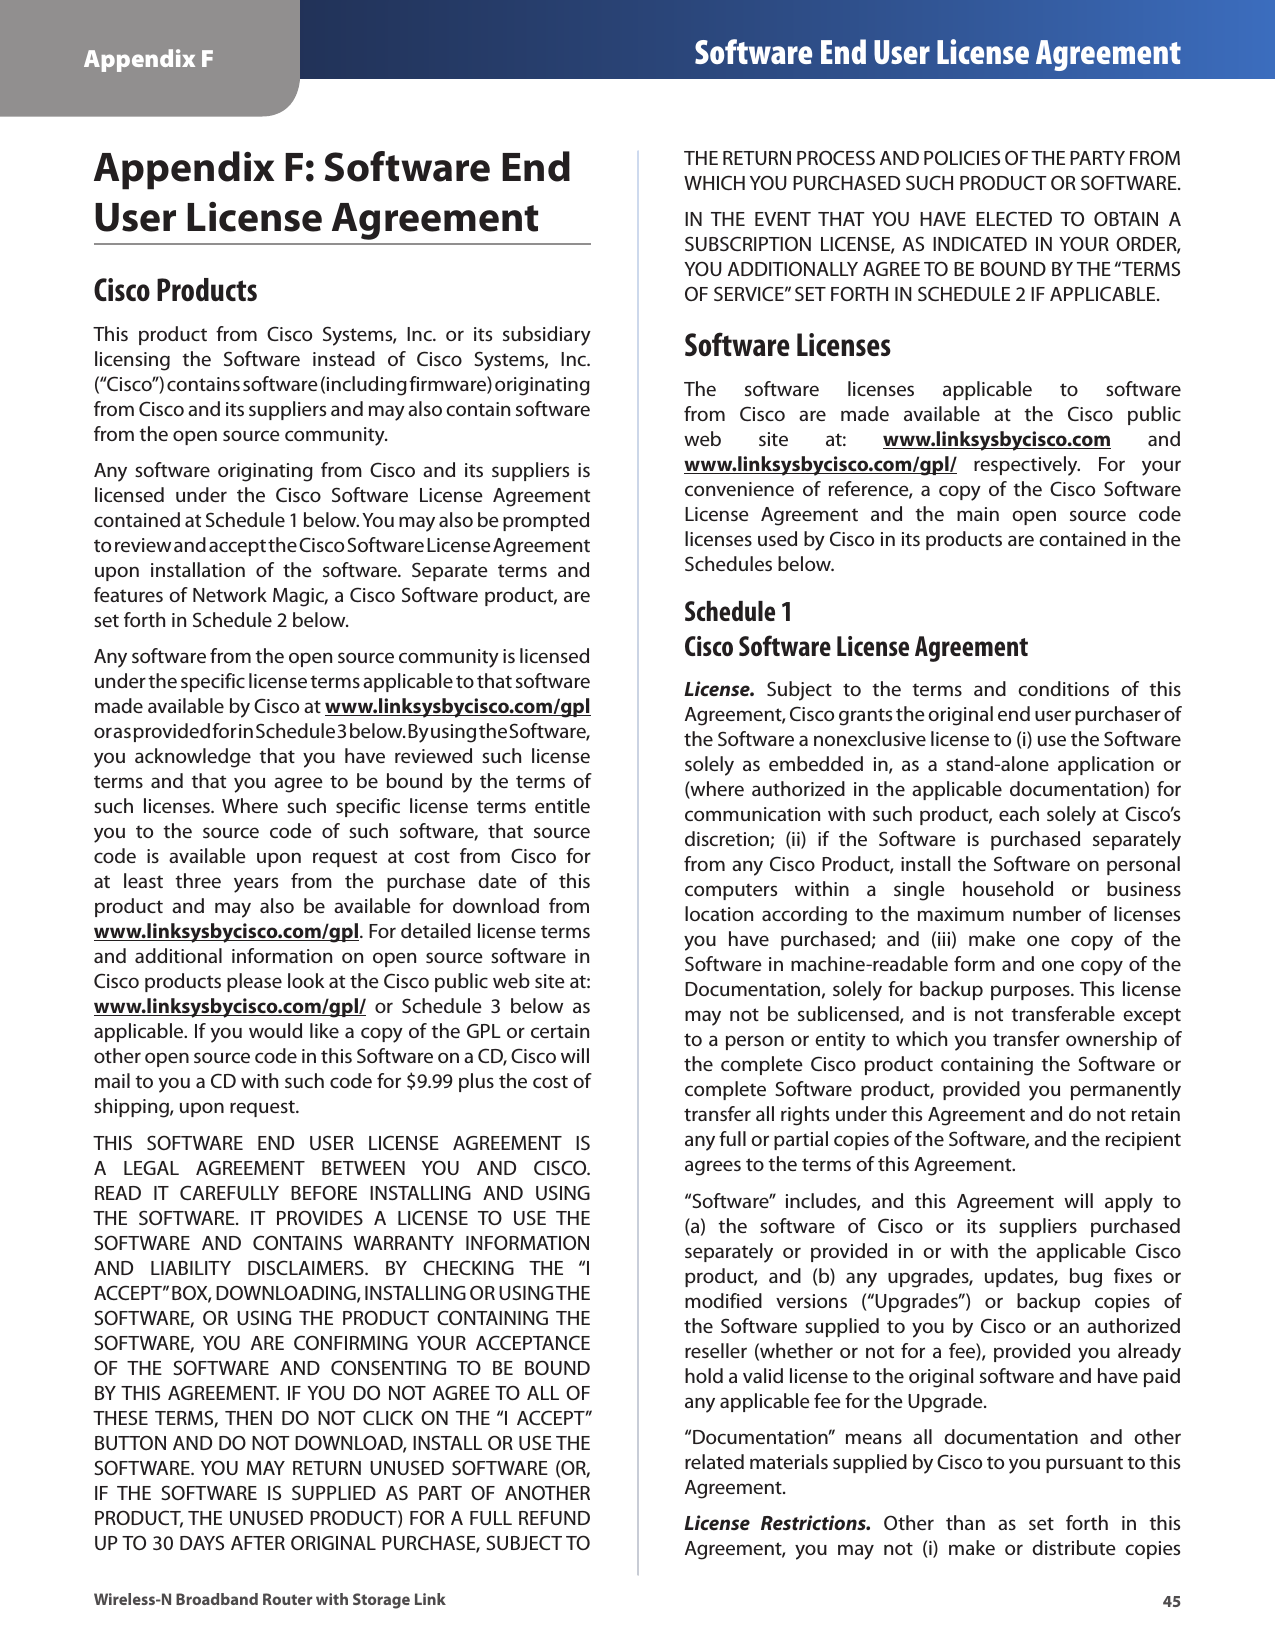 45Appendix F Software End User License AgreementWireless-N Broadband Router with Storage LinkAppendix F: Software End User License AgreementCisco ProductsThis  product  from  Cisco  Systems,  Inc.  or  its  subsidiary licensing  the  Software  instead  of  Cisco  Systems,  Inc. (“Cisco”) contains software (including firmware) originating from Cisco and its suppliers and may also contain software from the open source community.Any software  originating from  Cisco  and  its  suppliers  is licensed  under  the  Cisco  Software  License  Agreement contained at Schedule 1 below. You may also be prompted to review and accept the Cisco Software License Agreement upon  installation  of  the  software.  Separate  terms  and features of Network Magic, a Cisco Software product, are set forth in Schedule 2 below. Any software from the open source community is licensed under the specific license terms applicable to that software made available by Cisco at www.linksysbycisco.com/gpl or as provided for in Schedule 3 below. By using the Software, you  acknowledge  that  you  have  reviewed  such  license terms  and  that  you  agree  to  be  bound  by the  terms  of such  licenses. Where  such  specific  license  terms  entitle you  to  the  source  code  of  such  software,  that  source code  is  available  upon  request  at  cost  from  Cisco  for at  least  three  years  from  the  purchase  date  of  this product  and  may  also  be  available  for  download  from www.linksysbycisco.com/gpl. For detailed license terms and  additional  information  on  open  source  software  in Cisco products please look at the Cisco public web site at: www.linksysbycisco.com/gpl/  or  Schedule  3  below  as applicable. If you would like a copy of the GPL or certain other open source code in this Software on a CD, Cisco will mail to you a CD with such code for $9.99 plus the cost of shipping, upon request.THIS  SOFTWARE  END  USER  LICENSE  AGREEMENT  IS A  LEGAL  AGREEMENT  BETWEEN  YOU  AND  CISCO. READ  IT  CAREFULLY  BEFORE  INSTALLING  AND  USING THE  SOFTWARE.  IT  PROVIDES  A  LICENSE  TO  USE  THE SOFTWARE  AND  CONTAINS  WARRANTY  INFORMATION AND  LIABILITY  DISCLAIMERS.  BY  CHECKING  THE  “I ACCEPT” BOX, DOWNLOADING, INSTALLING OR USING THE SOFTWARE,  OR  USING THE  PRODUCT  CONTAINING  THE SOFTWARE,  YOU  ARE  CONFIRMING  YOUR  ACCEPTANCE OF  THE  SOFTWARE  AND  CONSENTING  TO  BE  BOUND BY THIS AGREEMENT.  IF YOU DO NOT AGREE TO ALL OF THESE TERMS,  THEN  DO  NOT  CLICK  ON THE “I  ACCEPT” BUTTON AND DO NOT DOWNLOAD, INSTALL OR USE THE SOFTWARE. YOU MAY RETURN UNUSED SOFTWARE (OR, IF  THE  SOFTWARE  IS  SUPPLIED  AS  PART  OF  ANOTHER PRODUCT, THE UNUSED PRODUCT) FOR A FULL REFUND UP TO 30 DAYS AFTER ORIGINAL PURCHASE, SUBJECT TO THE RETURN PROCESS AND POLICIES OF THE PARTY FROM WHICH YOU PURCHASED SUCH PRODUCT OR SOFTWARE.IN  THE  EVENT  THAT  YOU  HAVE  ELECTED  TO  OBTAIN  A SUBSCRIPTION LICENSE, AS INDICATED  IN YOUR  ORDER, YOU ADDITIONALLY AGREE TO BE BOUND BY THE “TERMS OF SERVICE” SET FORTH IN SCHEDULE 2 IF APPLICABLE.Software LicensesThe  software  licenses  applicable  to  software from  Cisco  are  made  available  at  the  Cisco  public web  site  at:  www.linksysbycisco.com  and www.linksysbycisco.com/gpl/  respectively.  For  your convenience  of  reference,  a  copy  of  the  Cisco  Software License  Agreement  and  the  main  open  source  code licenses used by Cisco in its products are contained in the Schedules below.Schedule 1 Cisco Software License AgreementLicense.  Subject  to  the  terms  and  conditions  of  this Agreement, Cisco grants the original end user purchaser of the Software a nonexclusive license to (i) use the Software solely  as  embedded  in,  as  a  stand-alone  application  or (where authorized  in  the  applicable  documentation)  for communication with such product, each solely at Cisco’s discretion;  (ii)  if  the  Software  is  purchased  separately from any Cisco Product, install the Software on personal computers  within  a  single  household  or  business location according to  the  maximum  number  of licenses you  have  purchased;  and  (iii)  make  one  copy  of  the Software in machine-readable form and one copy of the Documentation, solely for backup purposes. This license may  not  be  sublicensed,  and  is  not  transferable  except to a person or entity to which you transfer ownership of the  complete  Cisco  product  containing the  Software  or complete  Software  product,  provided  you  permanently transfer all rights under this Agreement and do not retain any full or partial copies of the Software, and the recipient agrees to the terms of this Agreement. “Software”  includes,  and  this  Agreement  will  apply  to  (a)  the  software  of  Cisco  or  its  suppliers  purchased separately  or  provided  in  or  with  the  applicable  Cisco product,  and  (b)  any  upgrades,  updates,  bug  fixes  or modified  versions  (“Upgrades”)  or  backup  copies  of the Software supplied to you by  Cisco or  an  authorized reseller (whether or  not for a fee), provided you already hold a valid license to the original software and have paid any applicable fee for the Upgrade. “Documentation”  means  all  documentation  and  other related materials supplied by Cisco to you pursuant to this Agreement.License  Restrictions.  Other  than  as  set  forth  in  this Agreement,  you  may  not  (i)  make  or  distribute  copies 